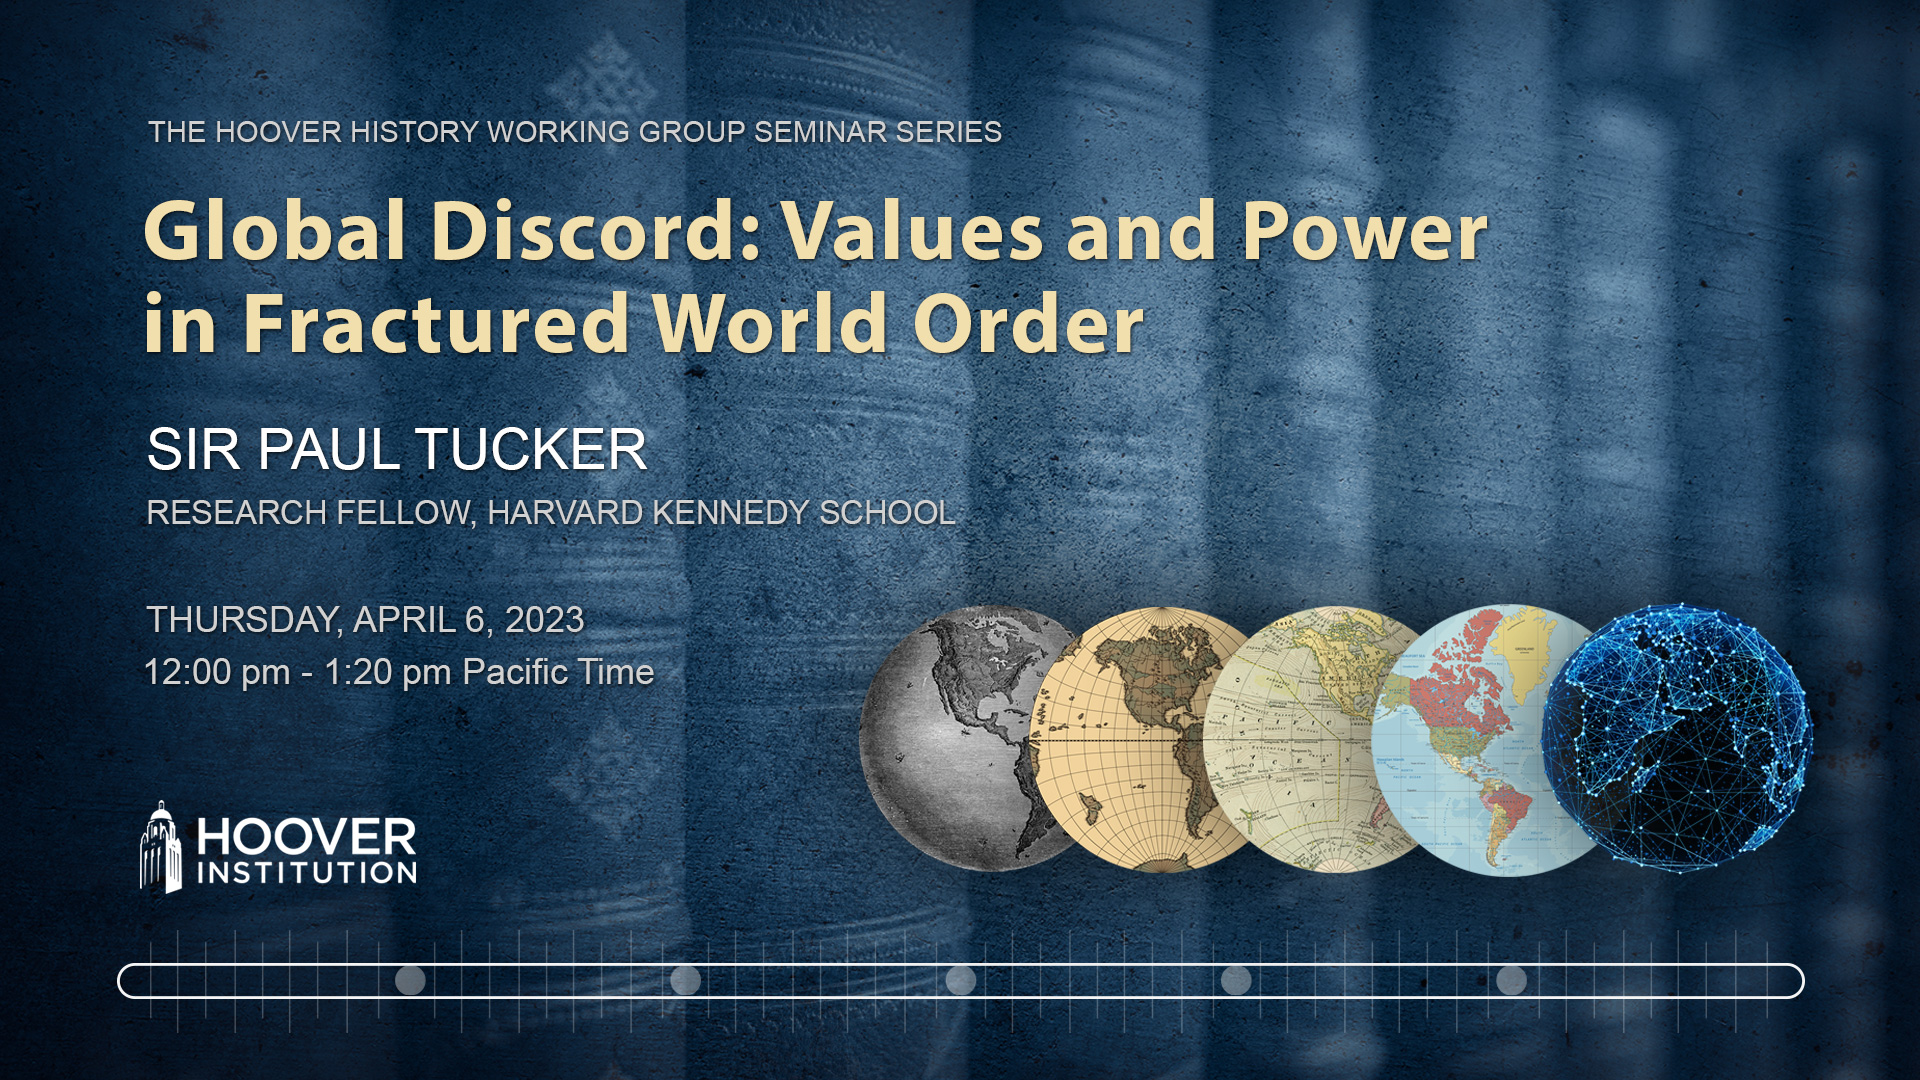 Global Discord: Values and Power in Fractured World Order